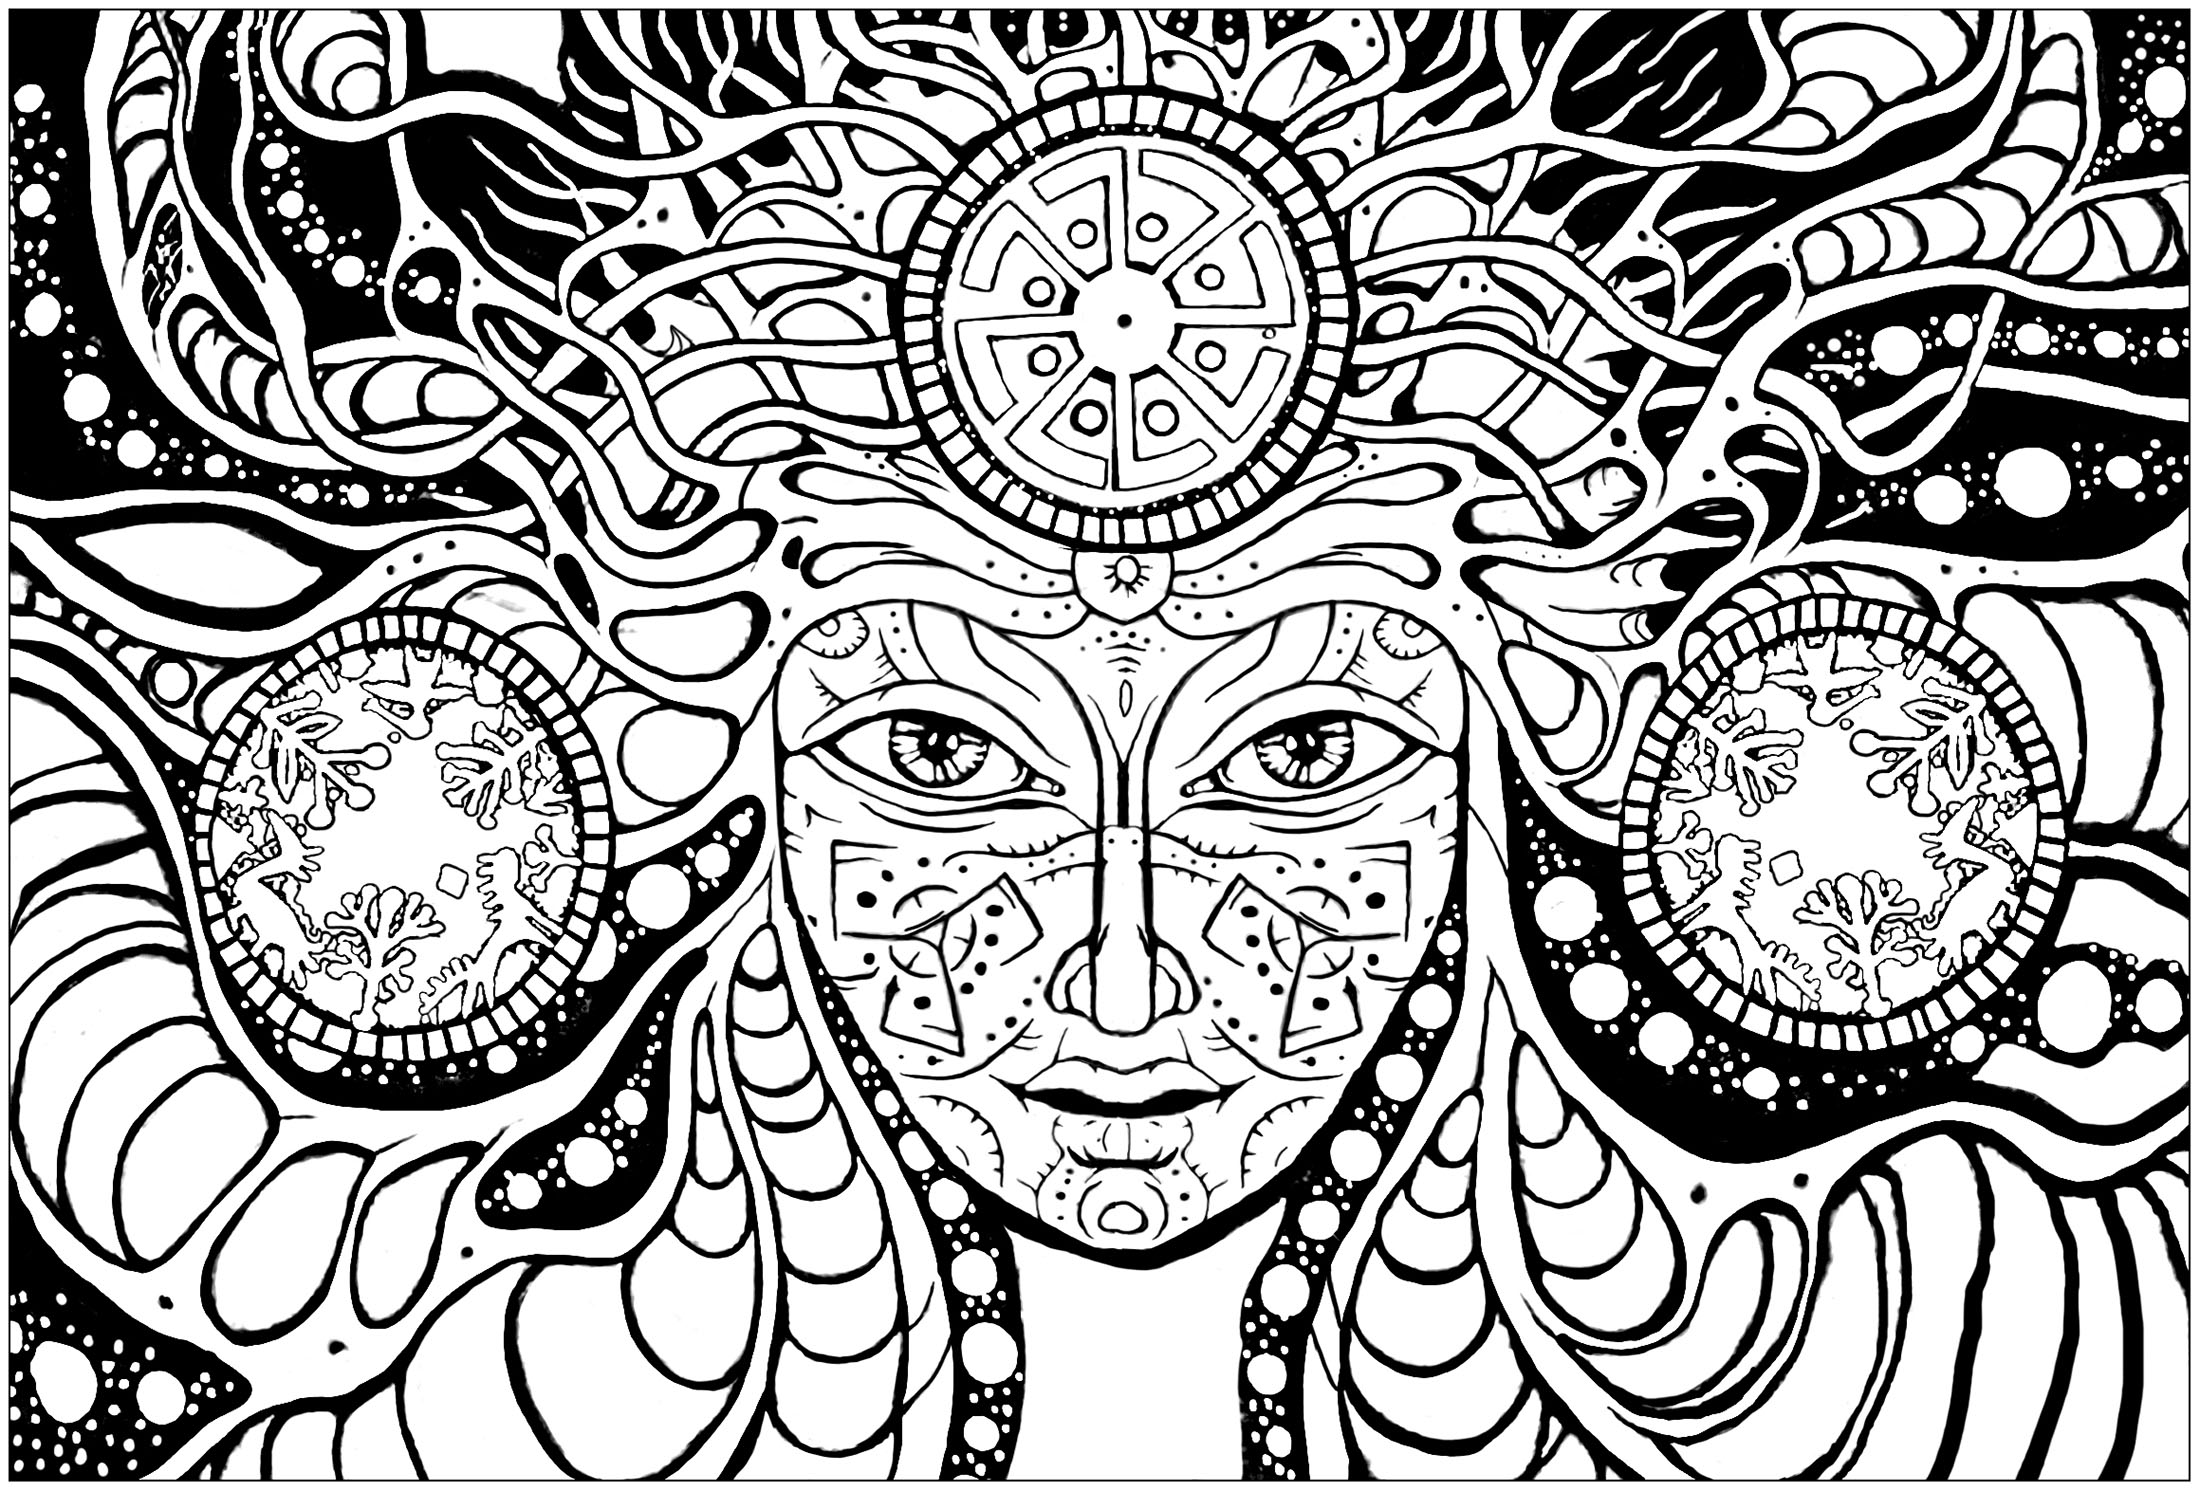 Psychedelic woman   Psychedelic Adult Coloring Pages